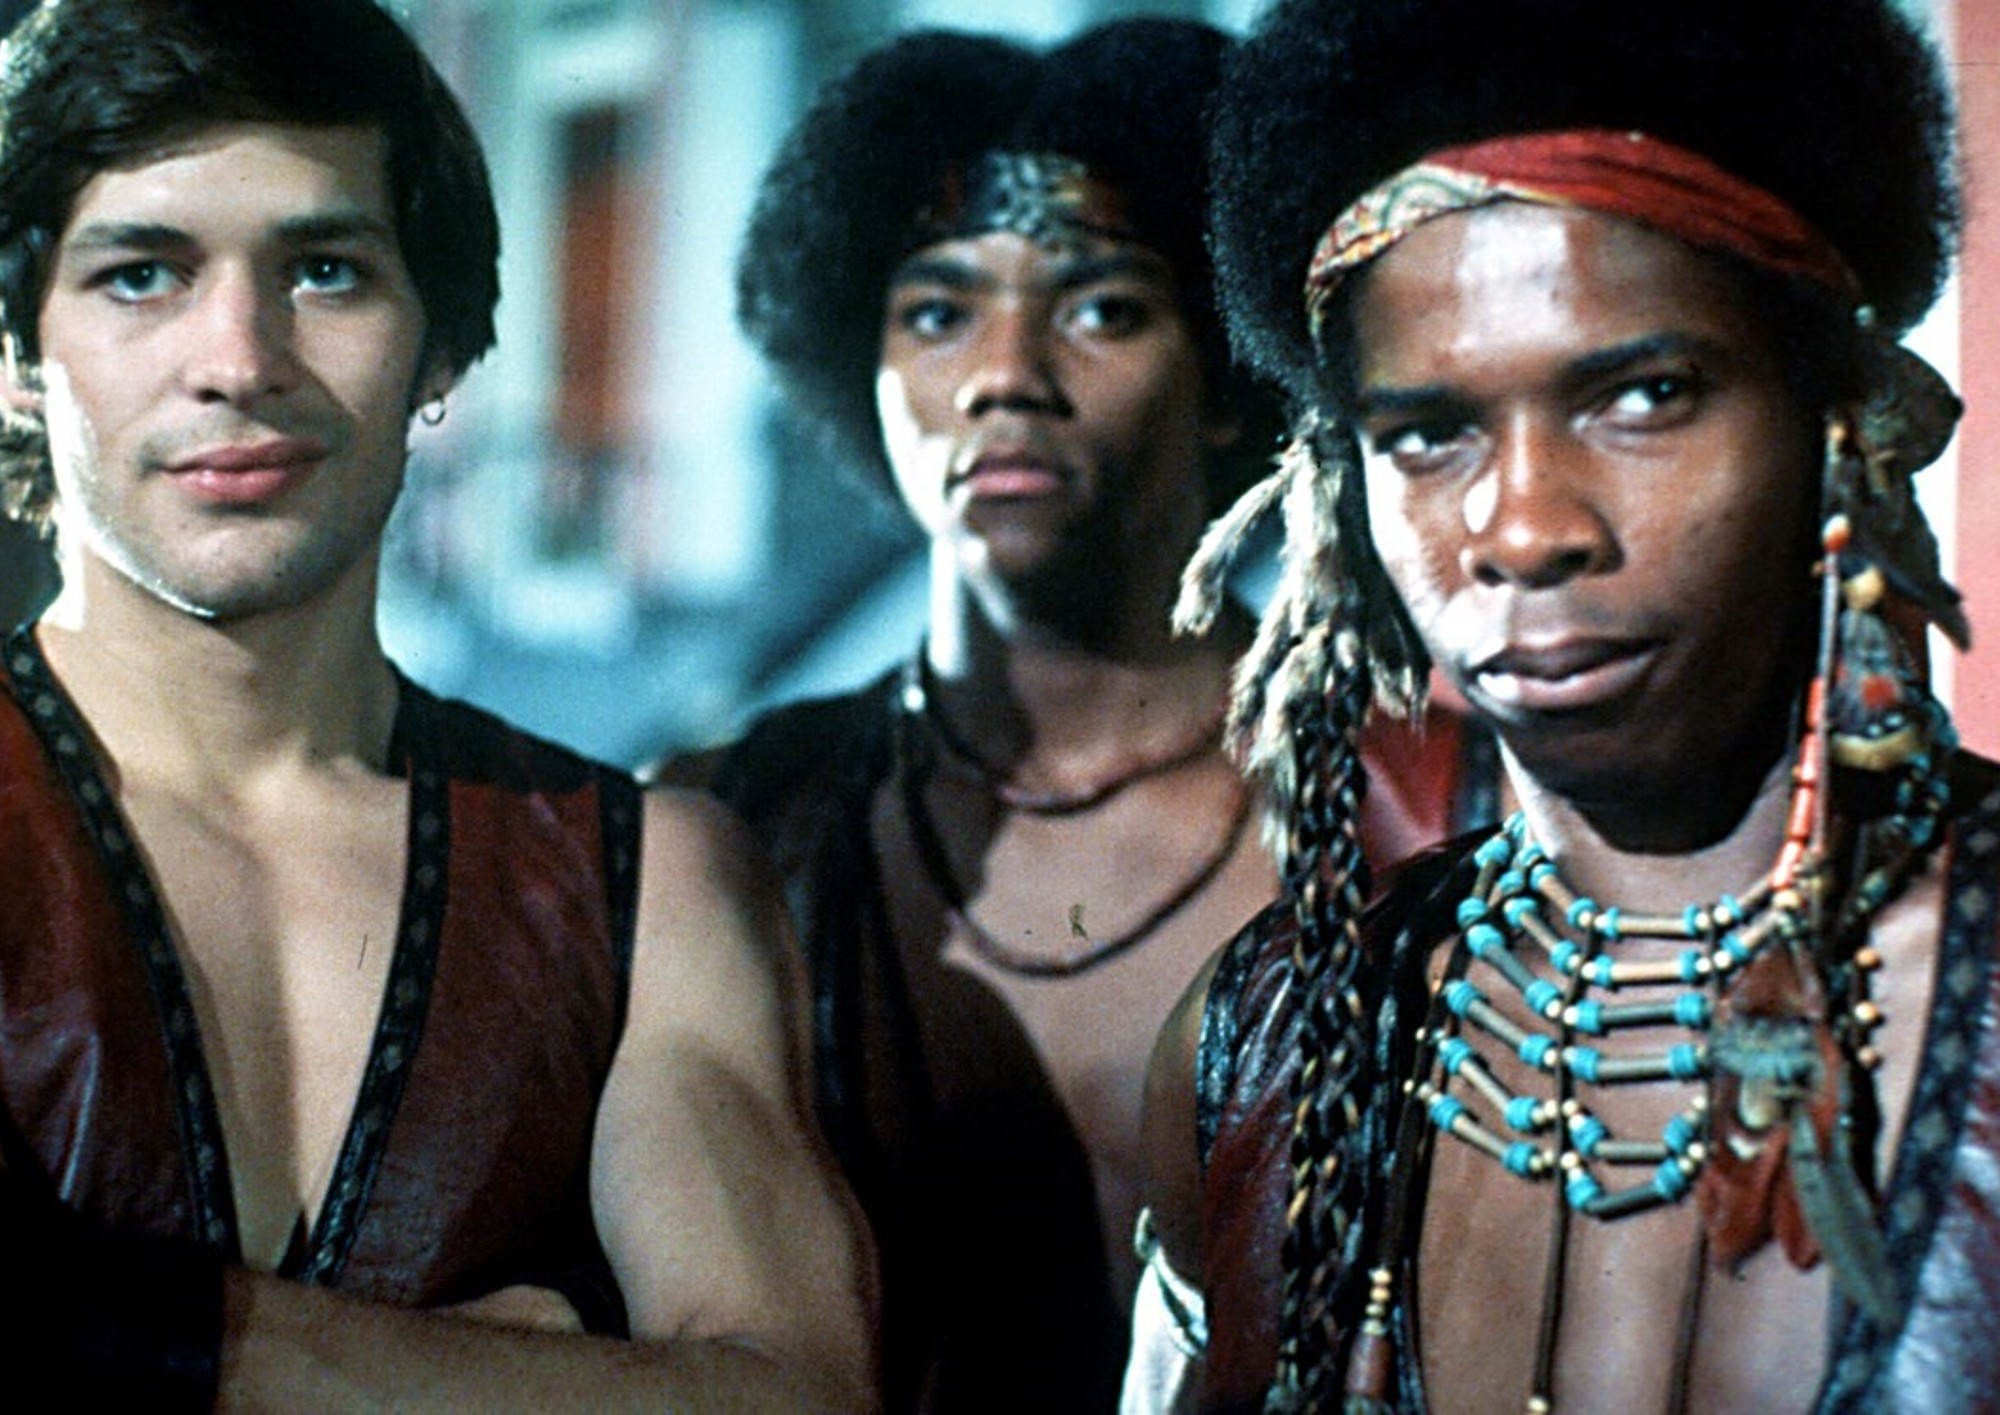 Image from the motion picture The Warriors